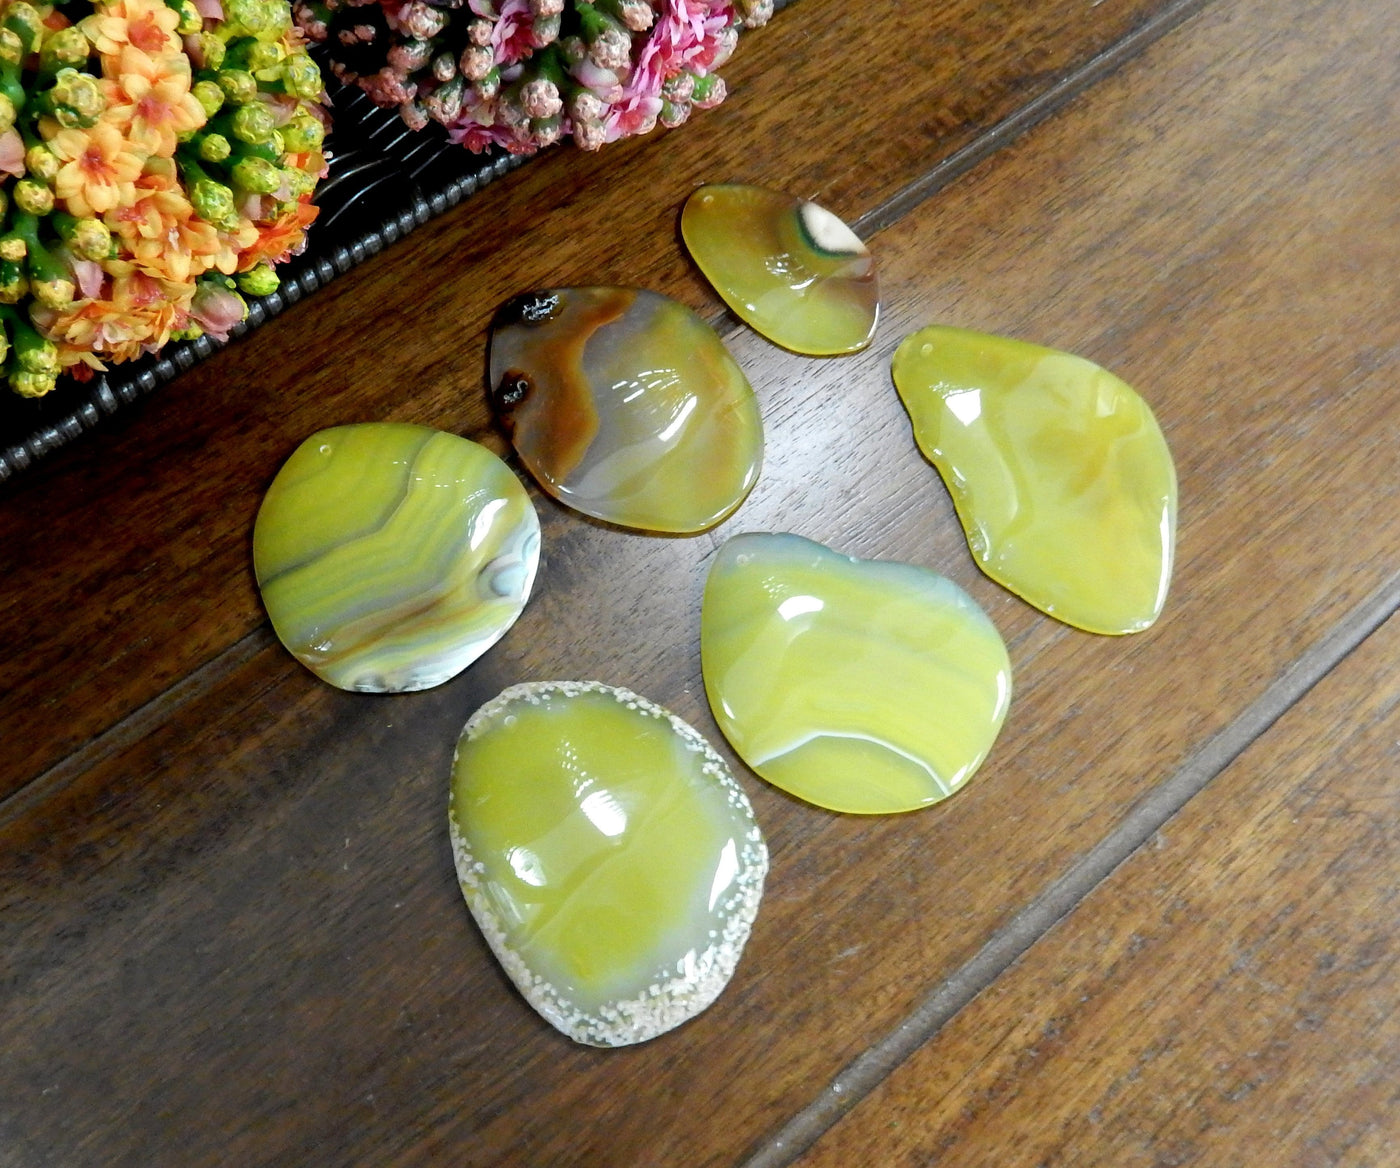 Side Angle of 6 Yellow Freeform Agate Slices with Polished Edge on Wooden Background.